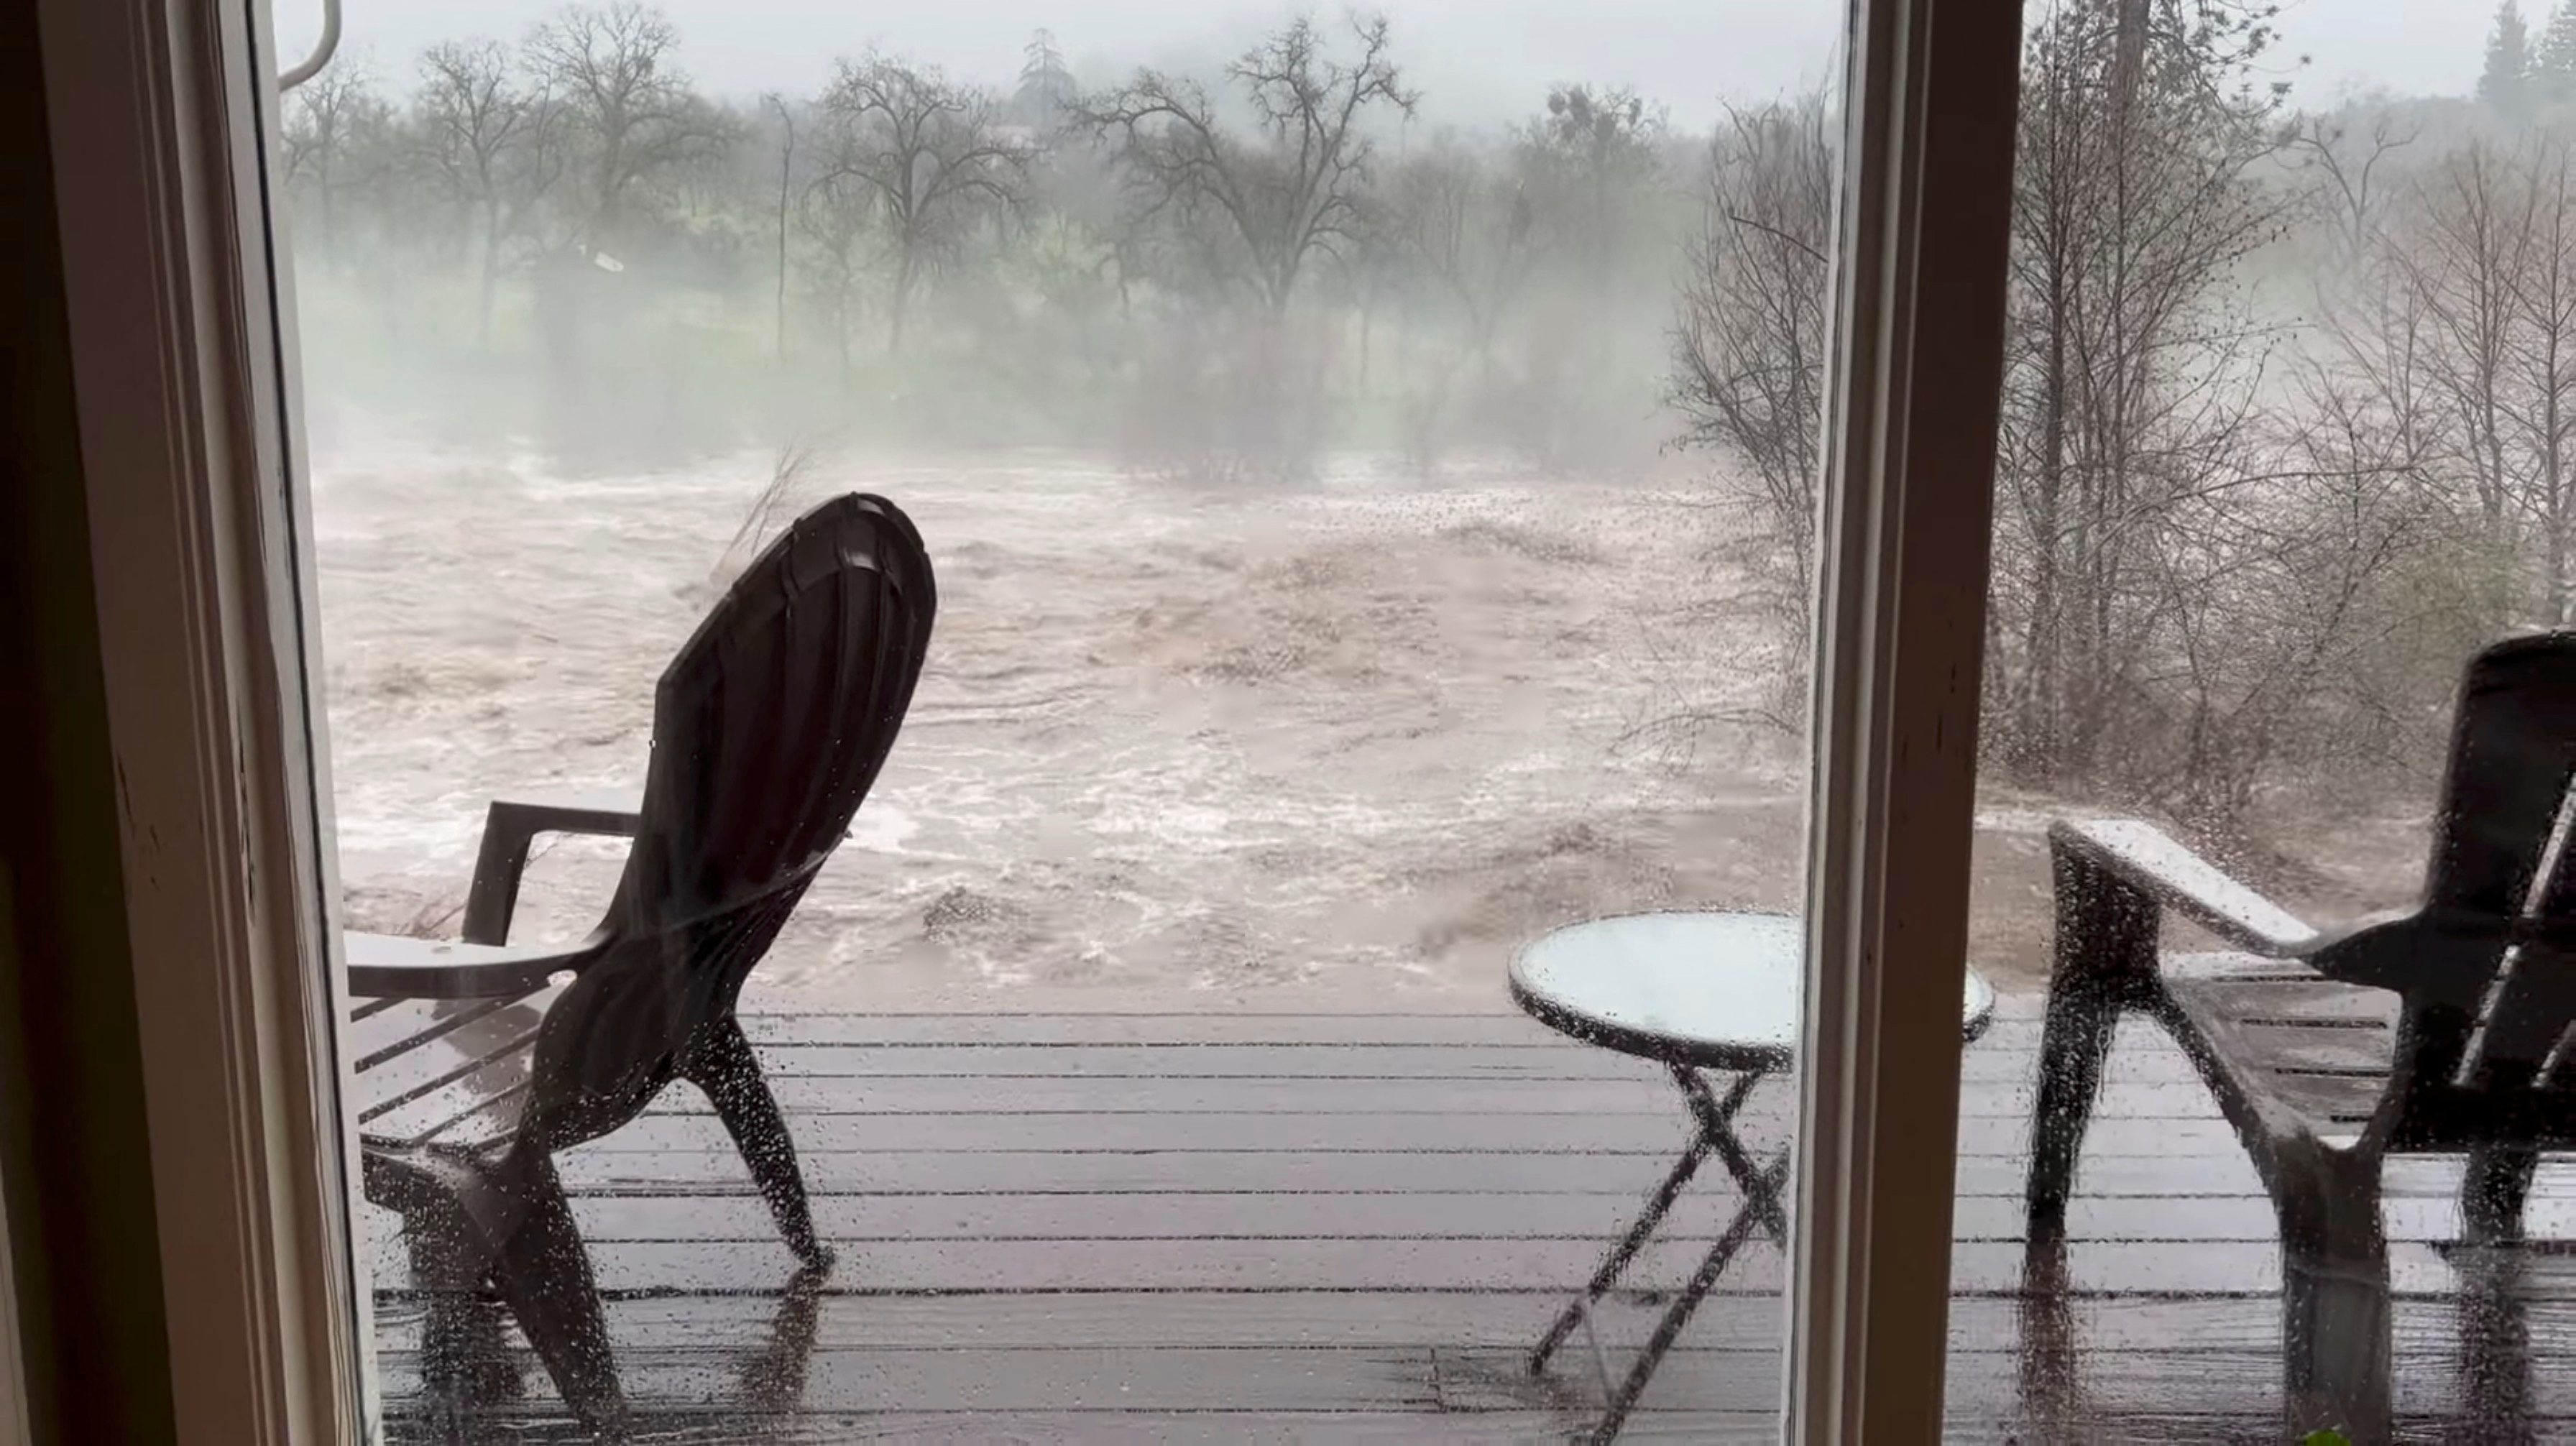 A view shows the overflowing Kern River, as seen from the living room window of a person's house, in Three Rivers